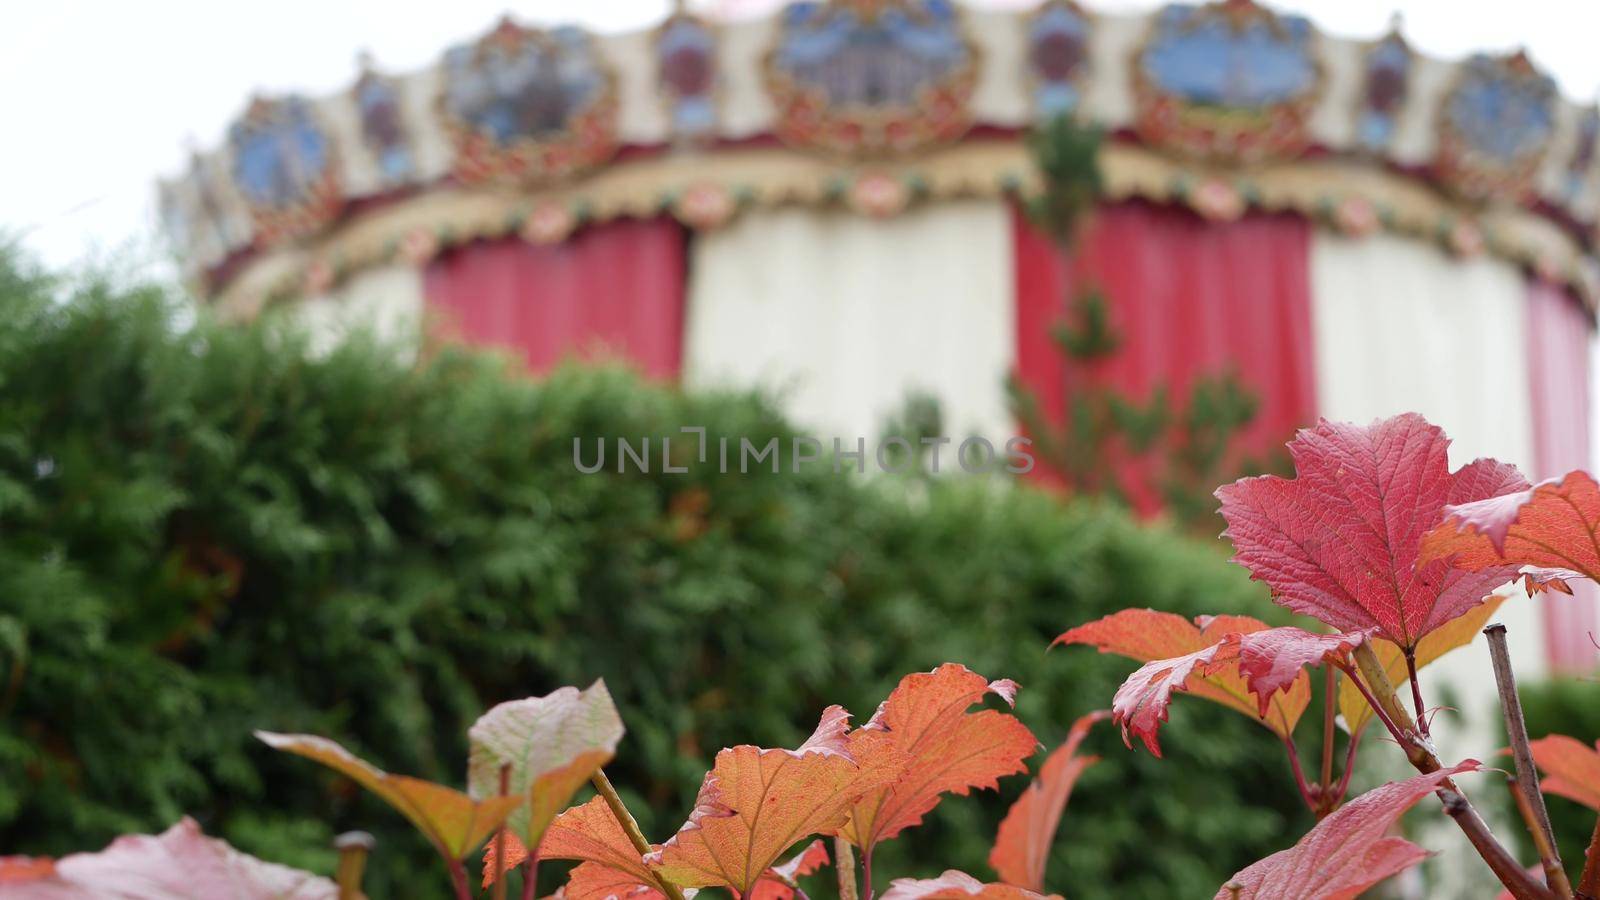 Vintage carousel in autumn park, retro circus or merry go round carrousel tent. Fall leaves and fairground or funfair in october, september or november city garden. Amusement attraction in Europe.